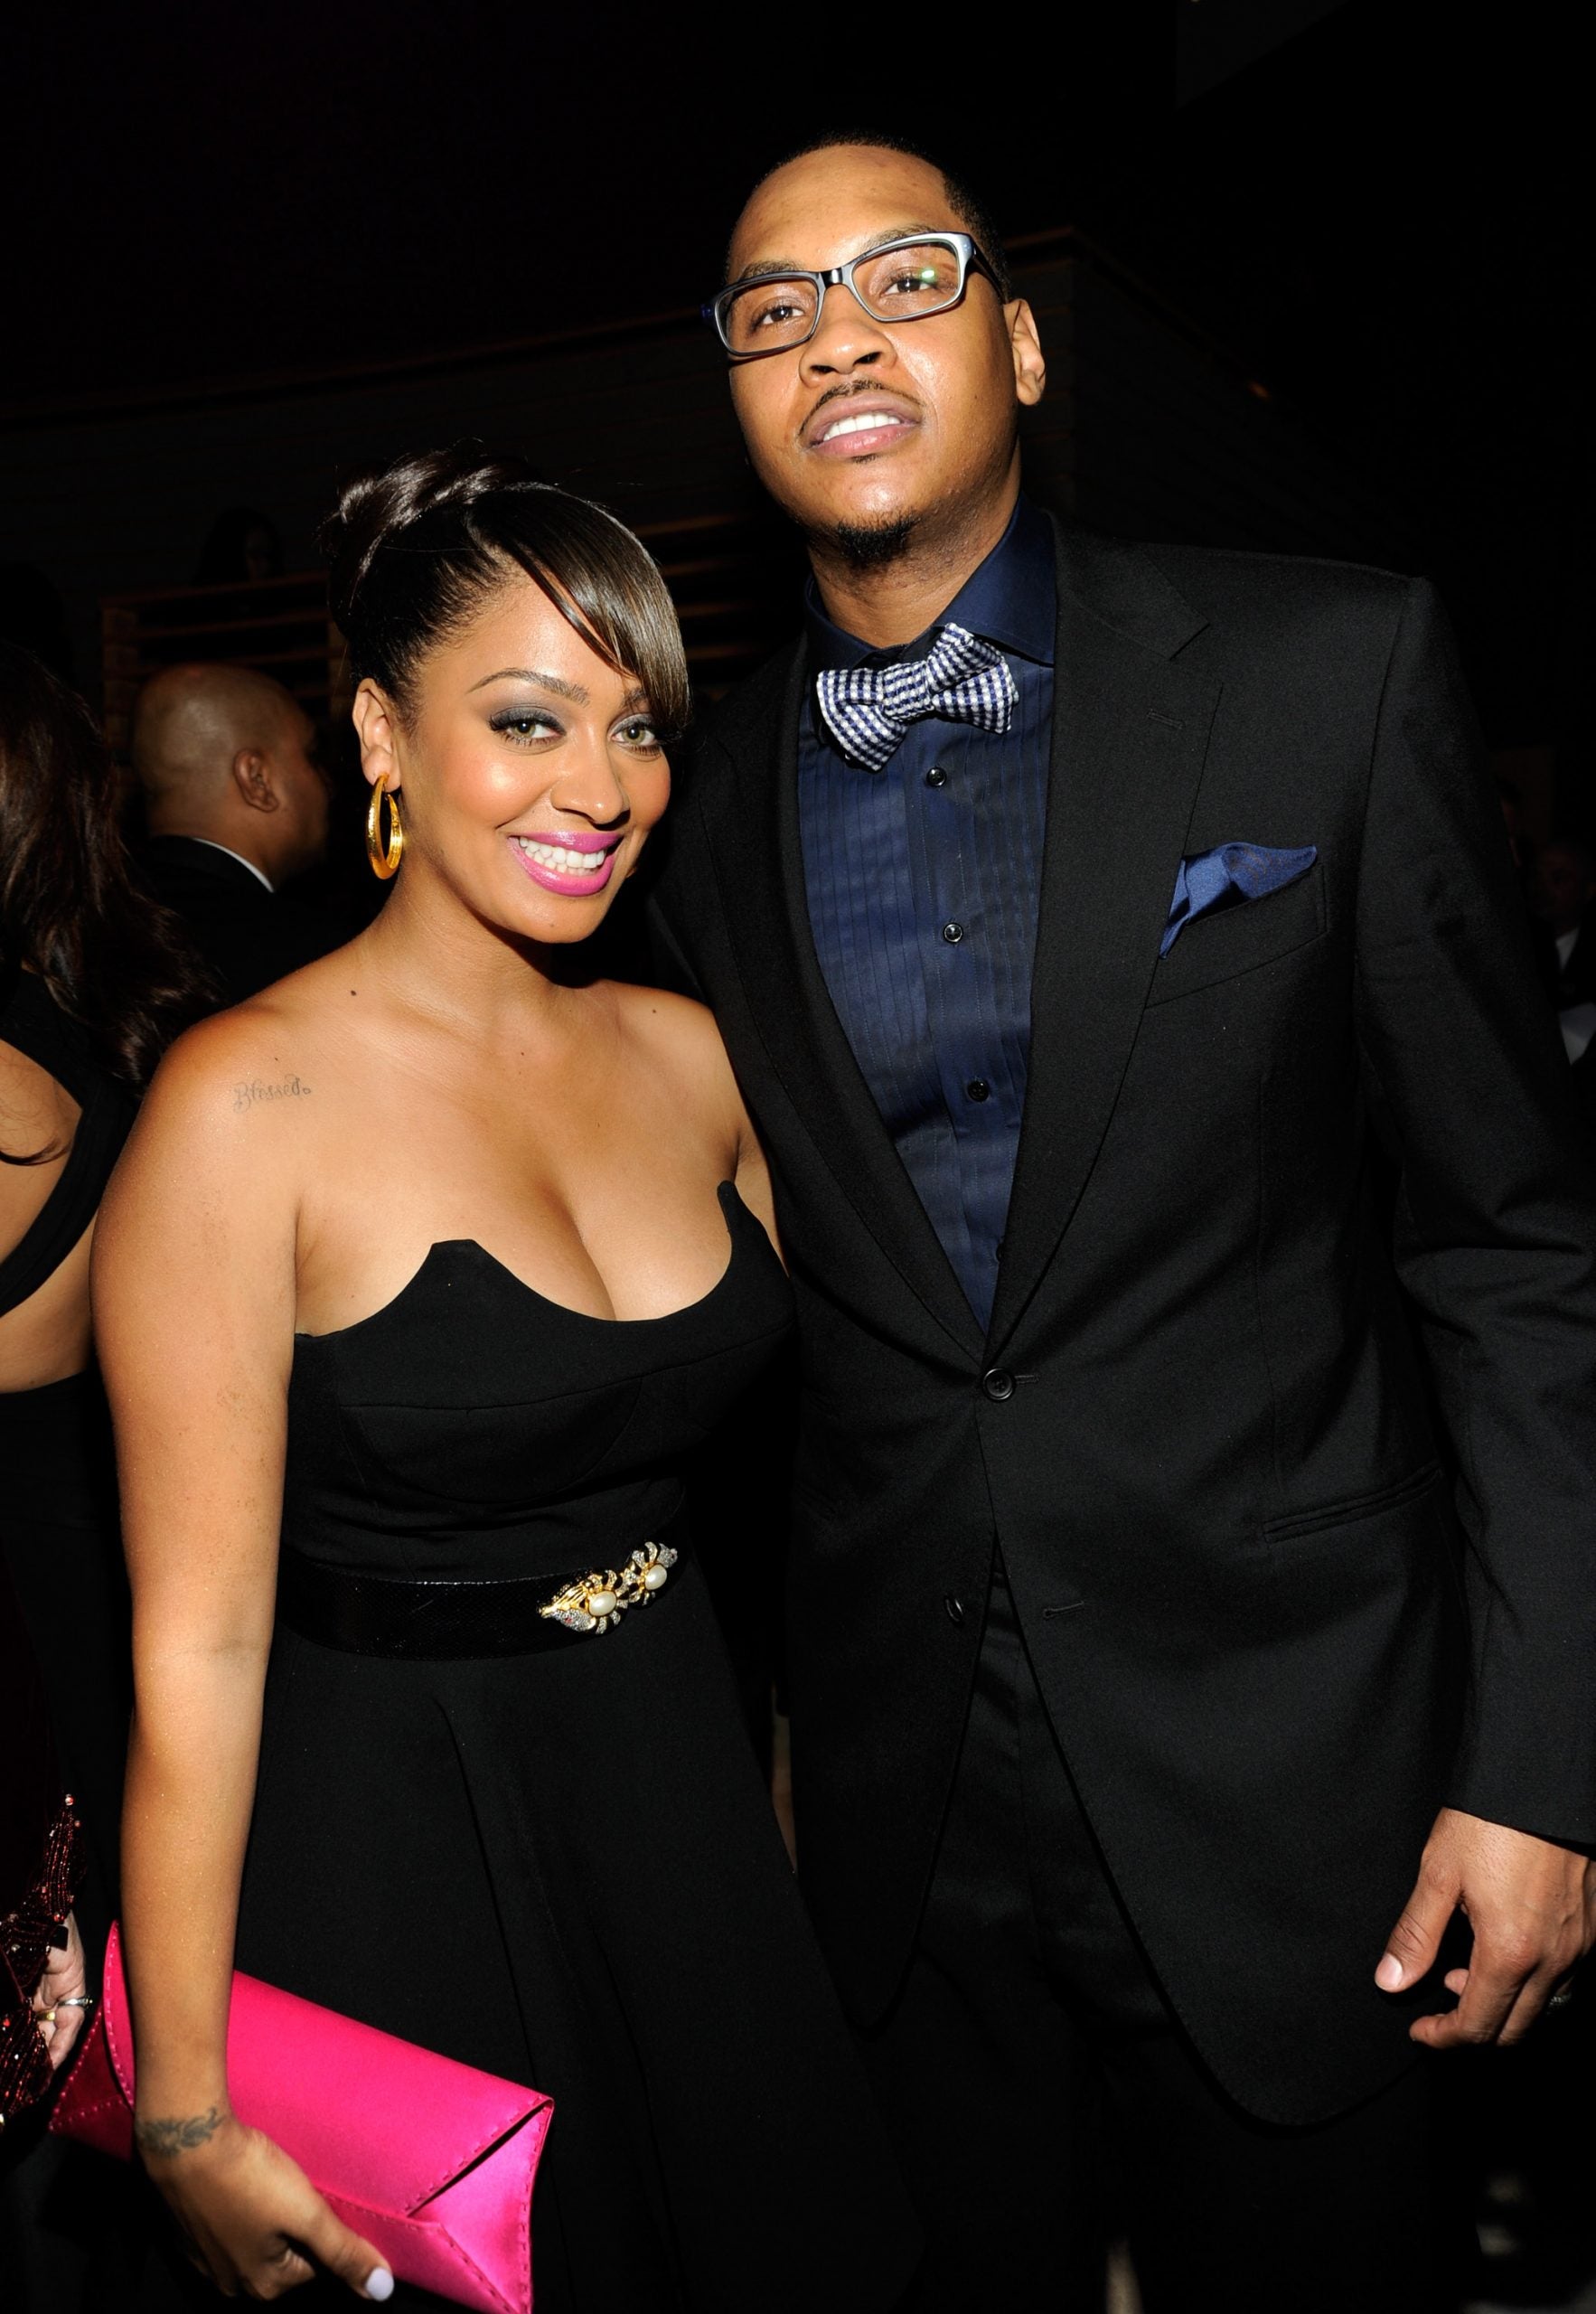 La La Anthony Files For Divorce From Carmelo Anthony After 11